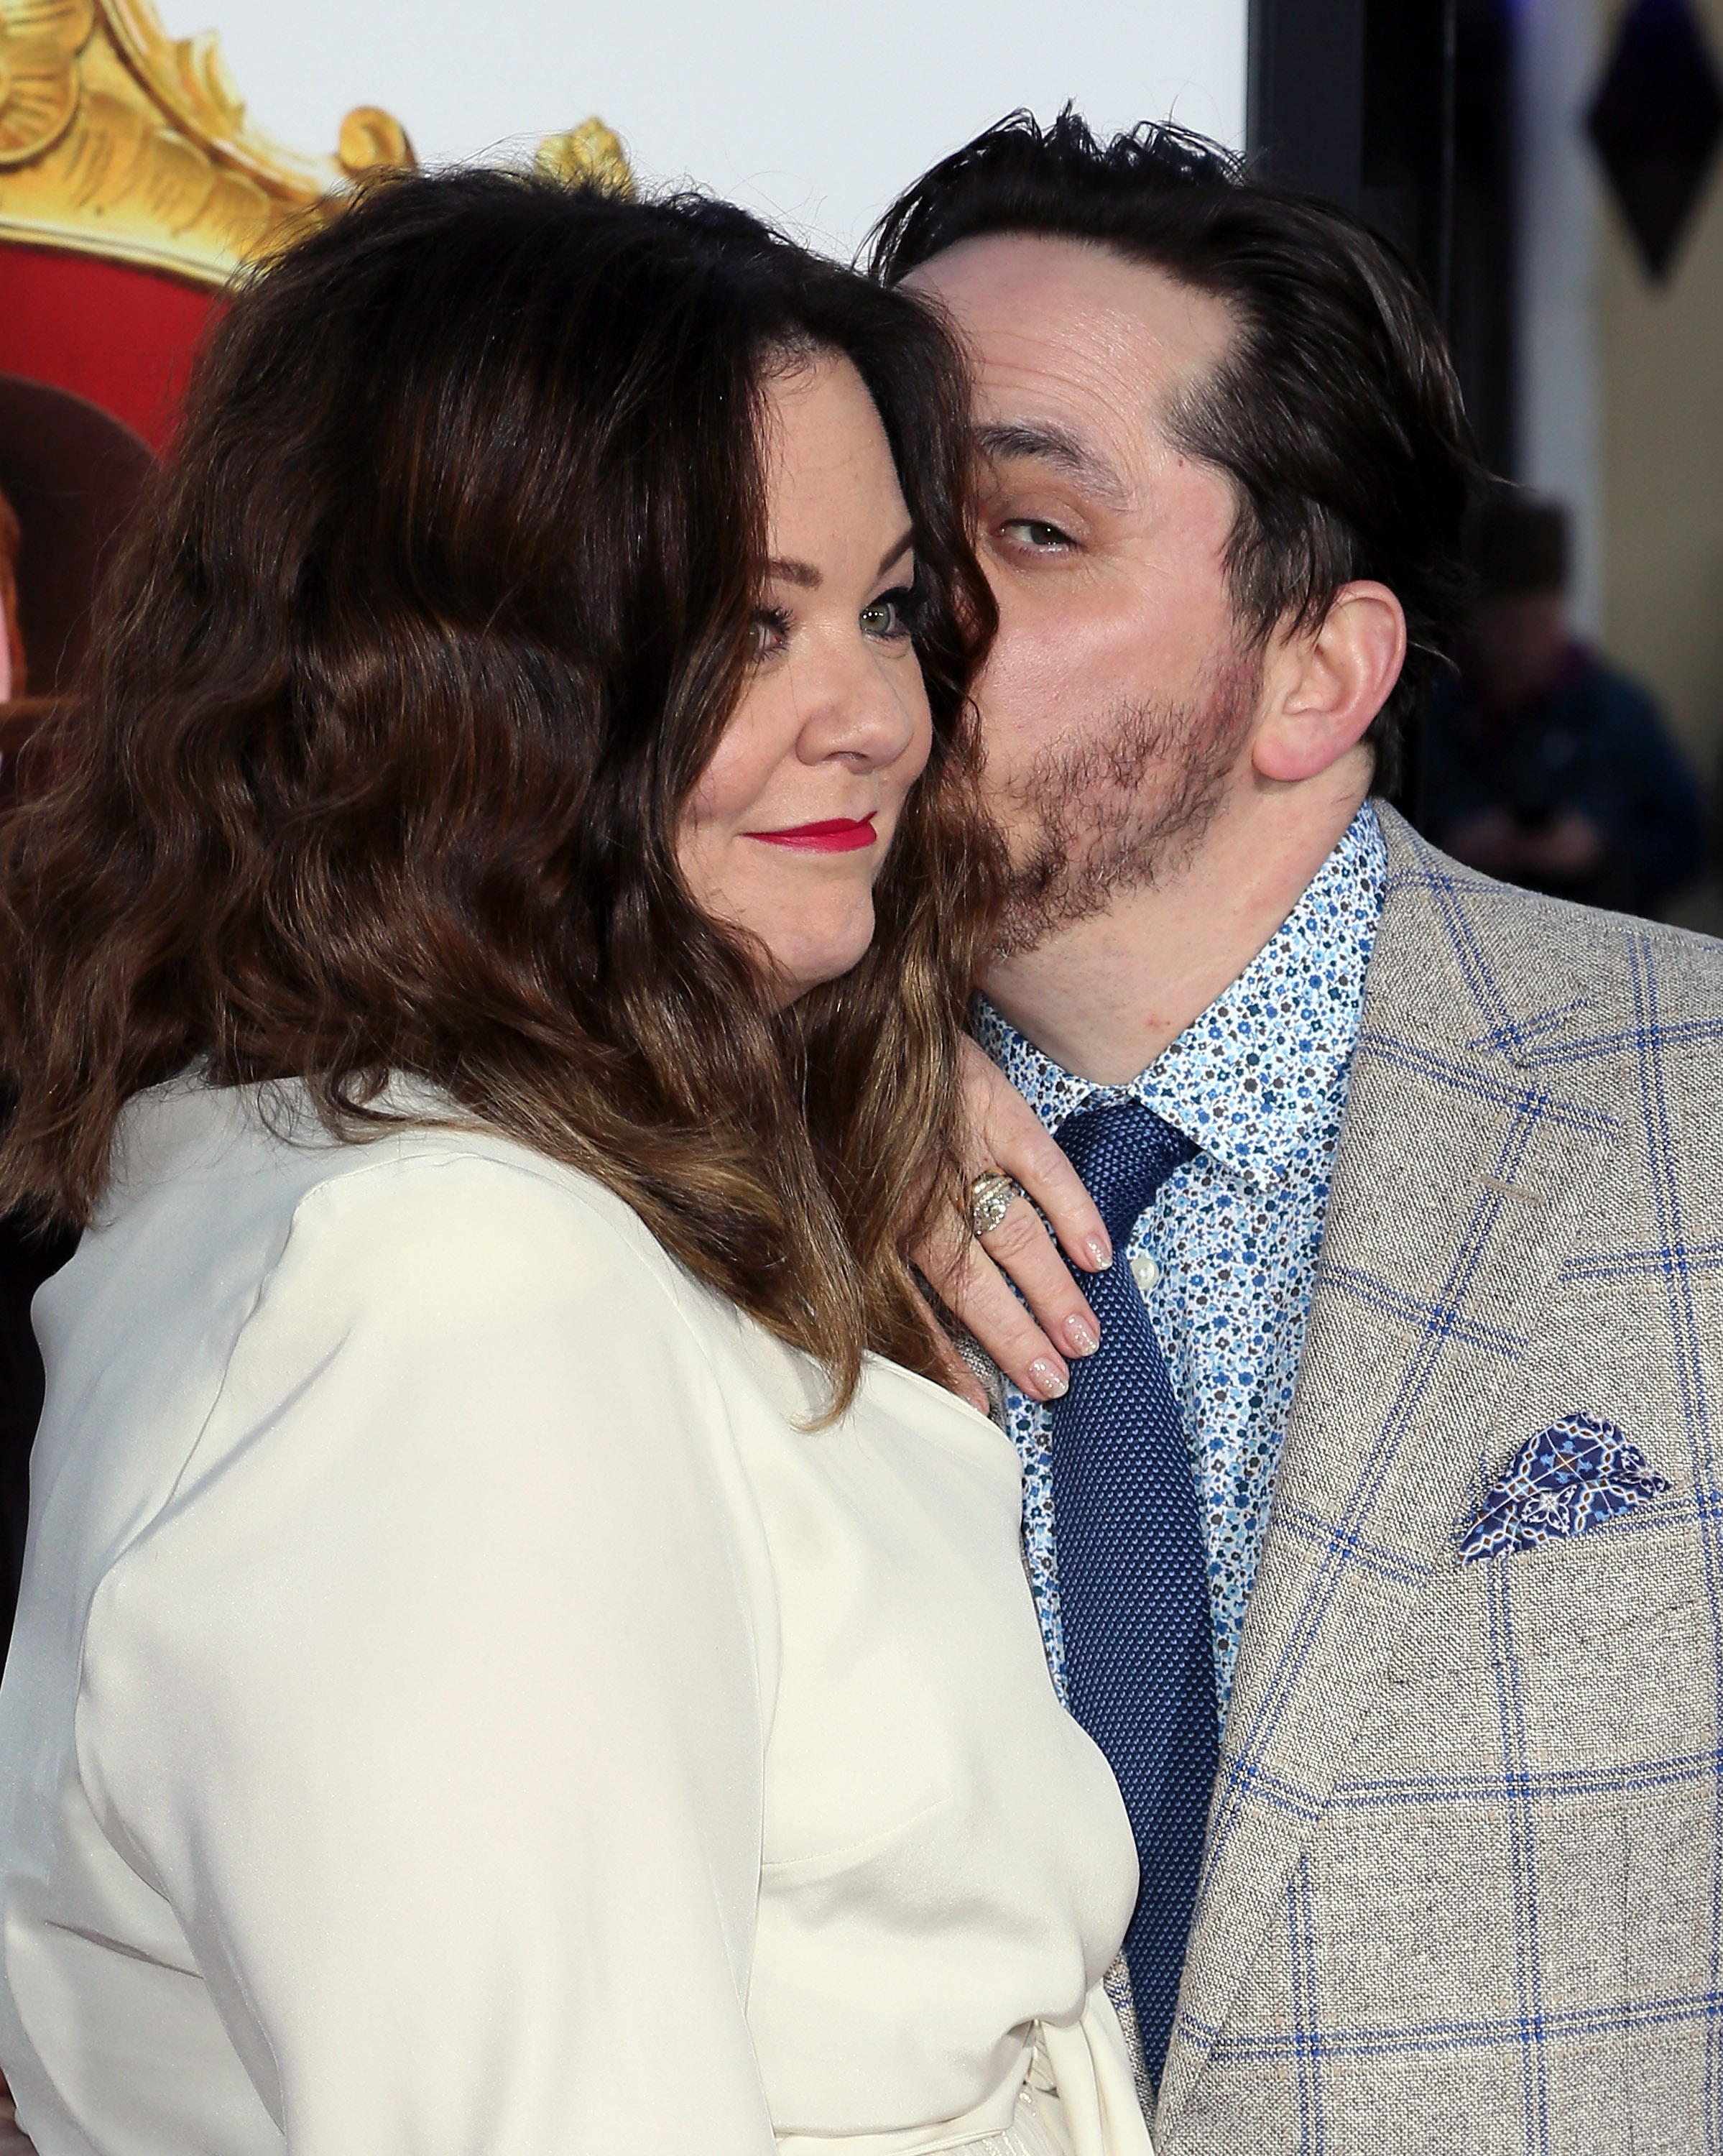 Actress Melissa McCarthy (L) and husband actor Ben Falcone attend the premiere of USA Pictures' "The Boss" at the Regency Village Theatre on March 28, 2016, in Westwood, California. | Source: Getty Images